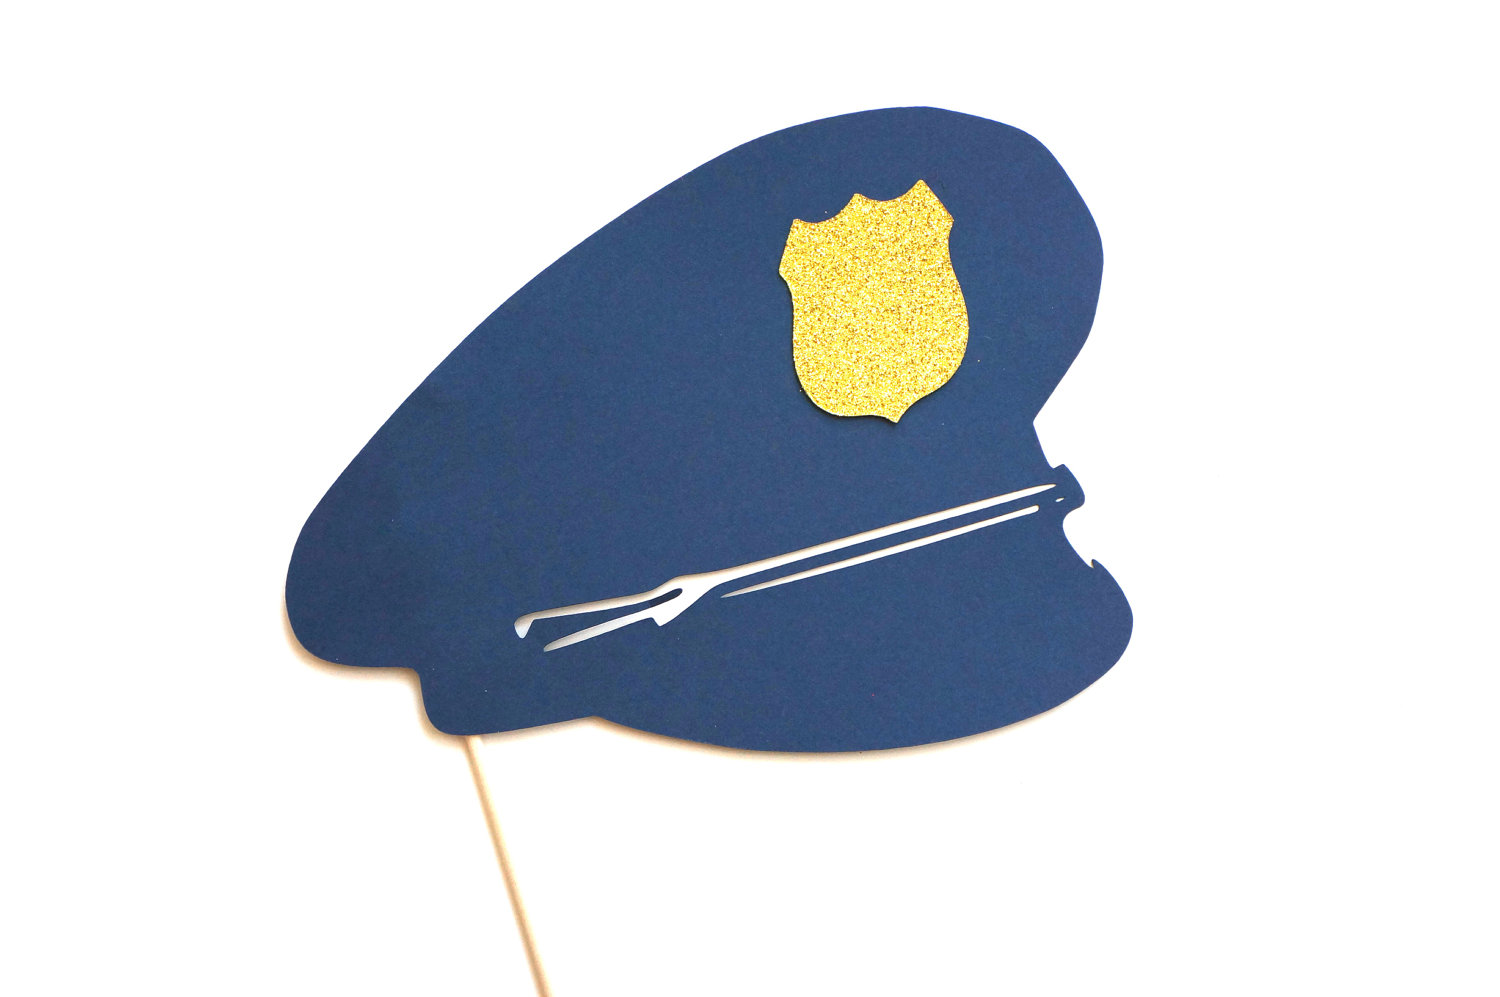 Popular items for police officer hat on Etsy